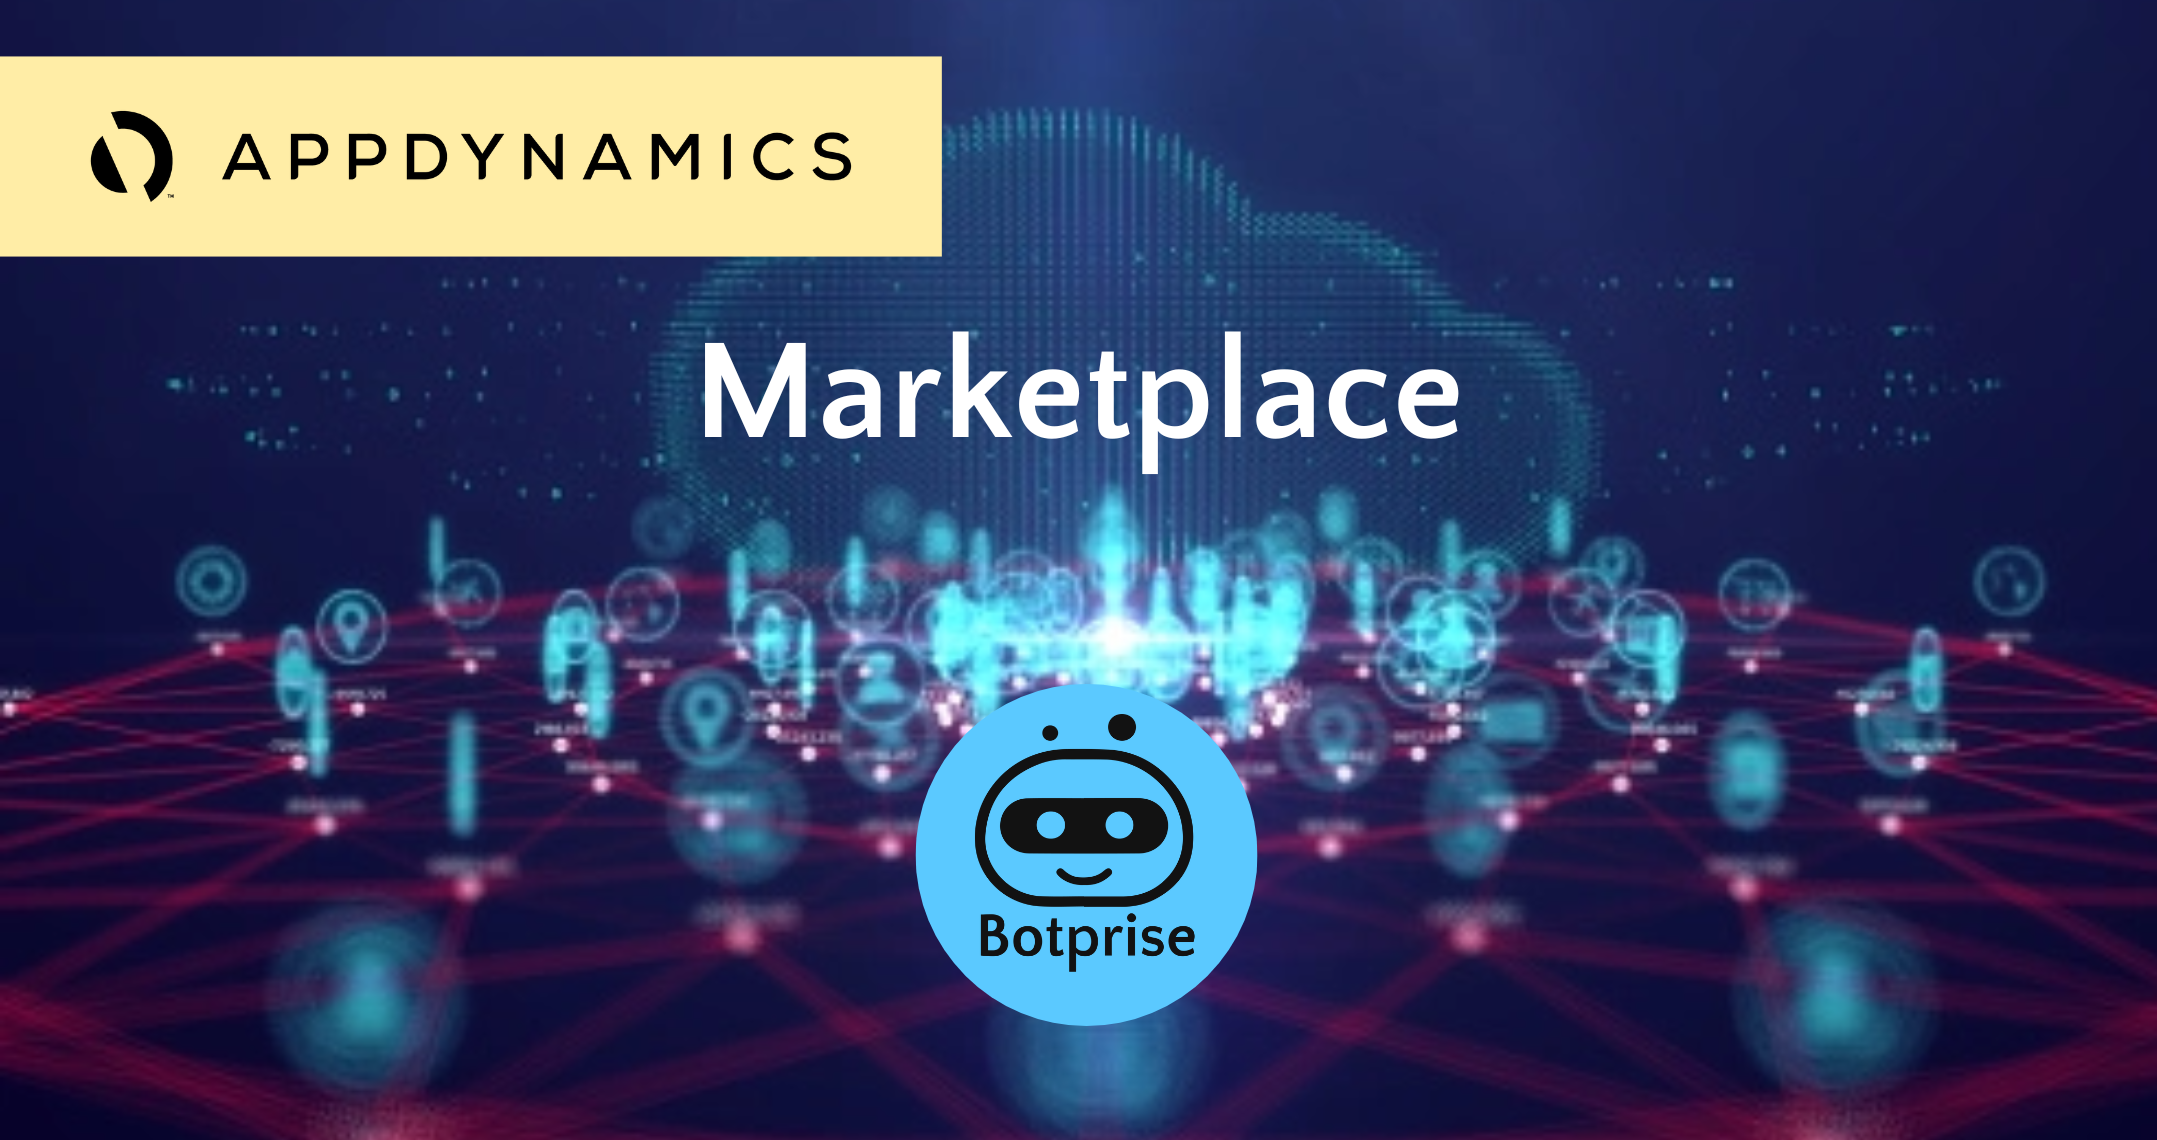 Botprise and AppDynamics (Marketplace)